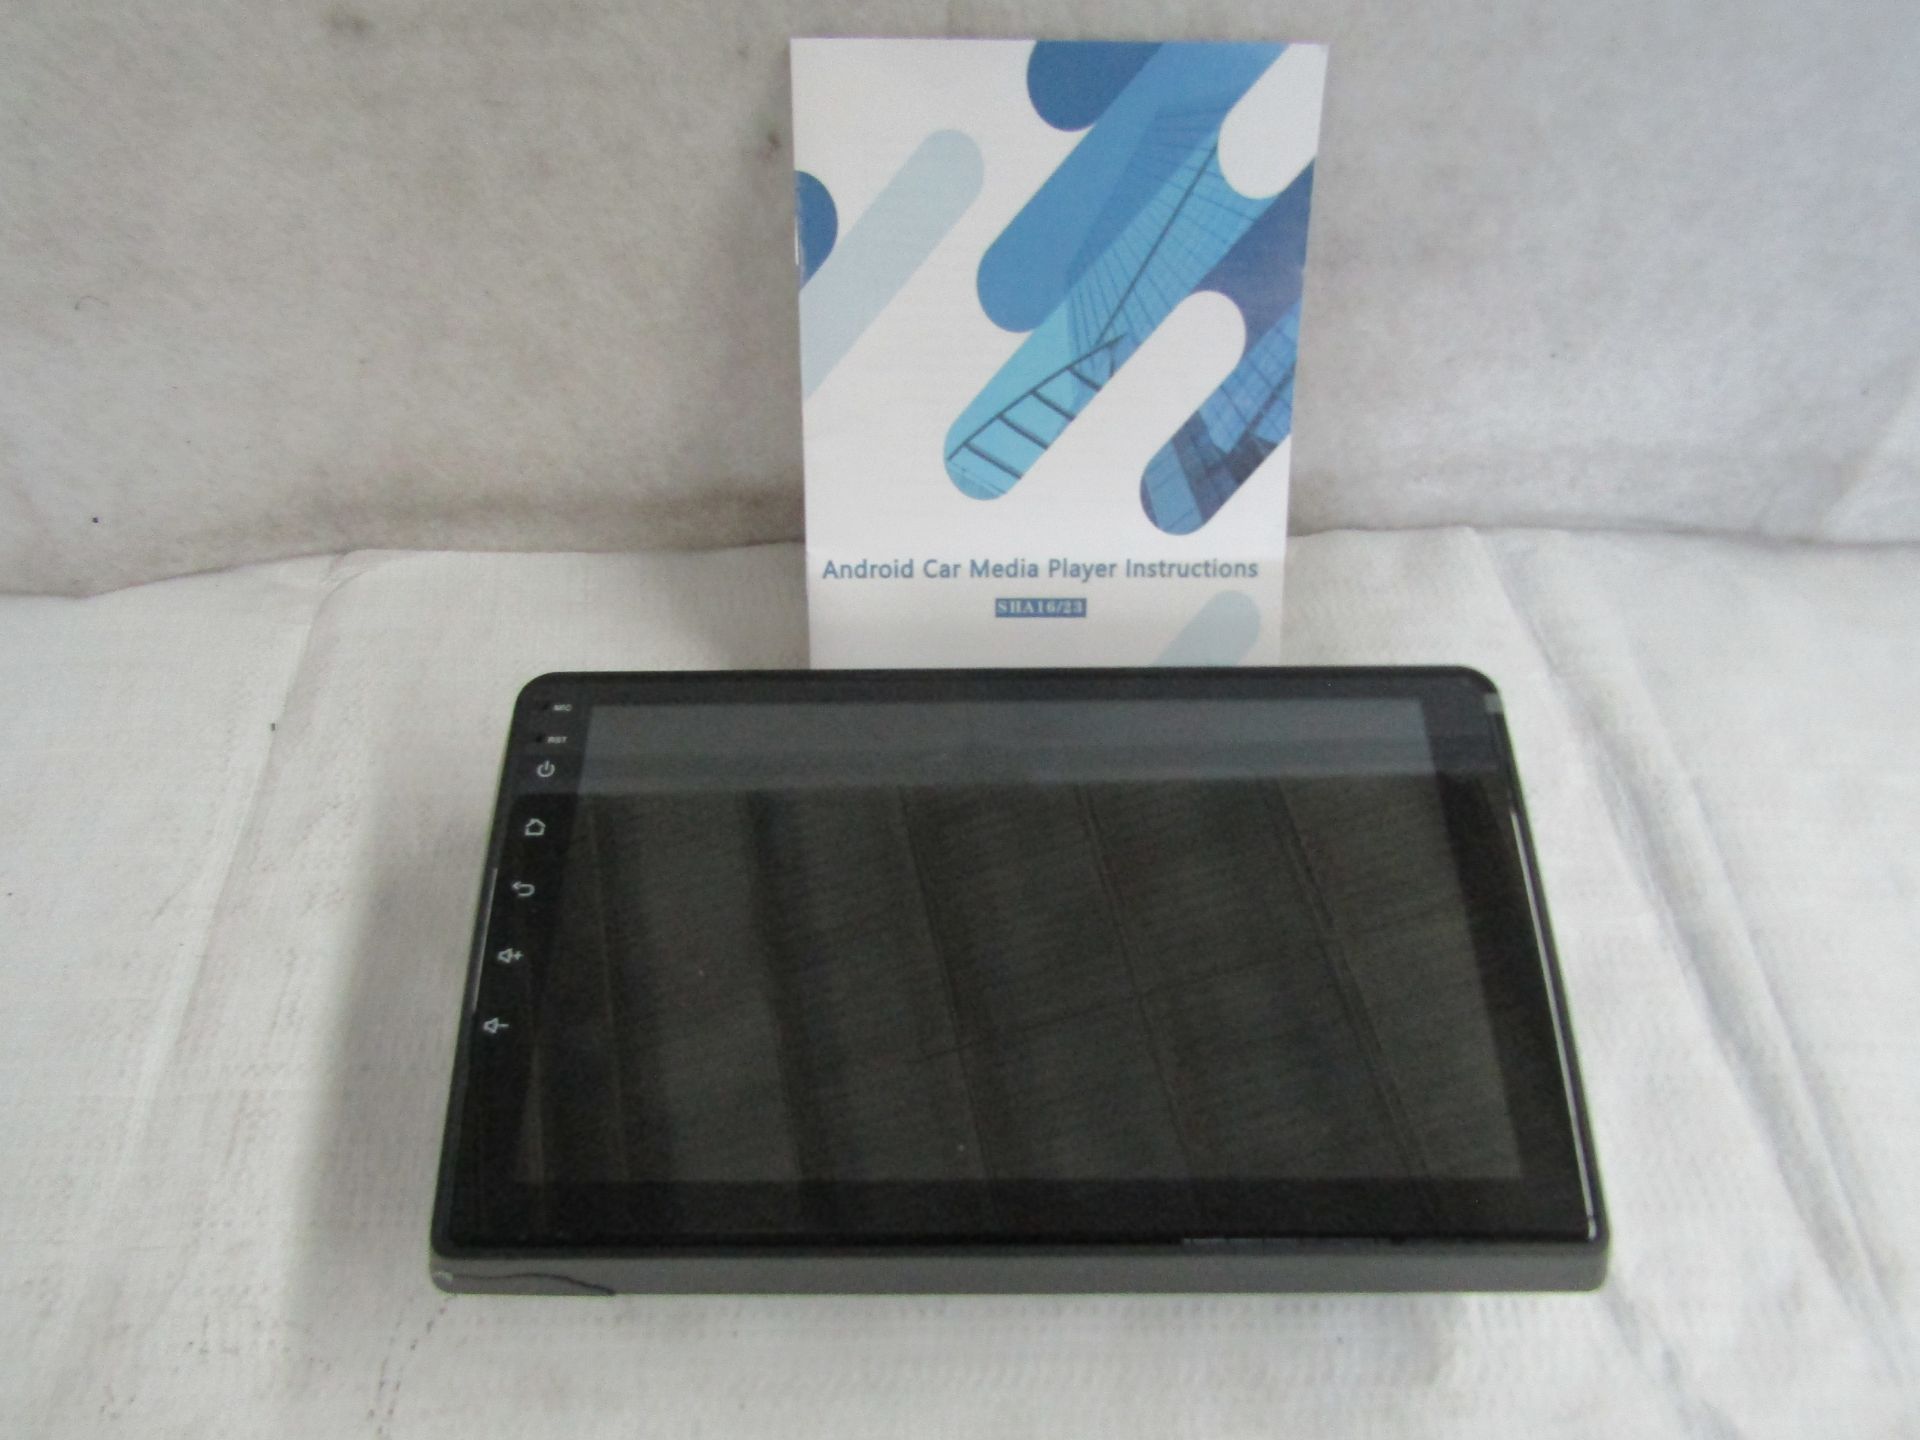 Android Car Media Player, Unchecked & Boxed, RRP Approx £59